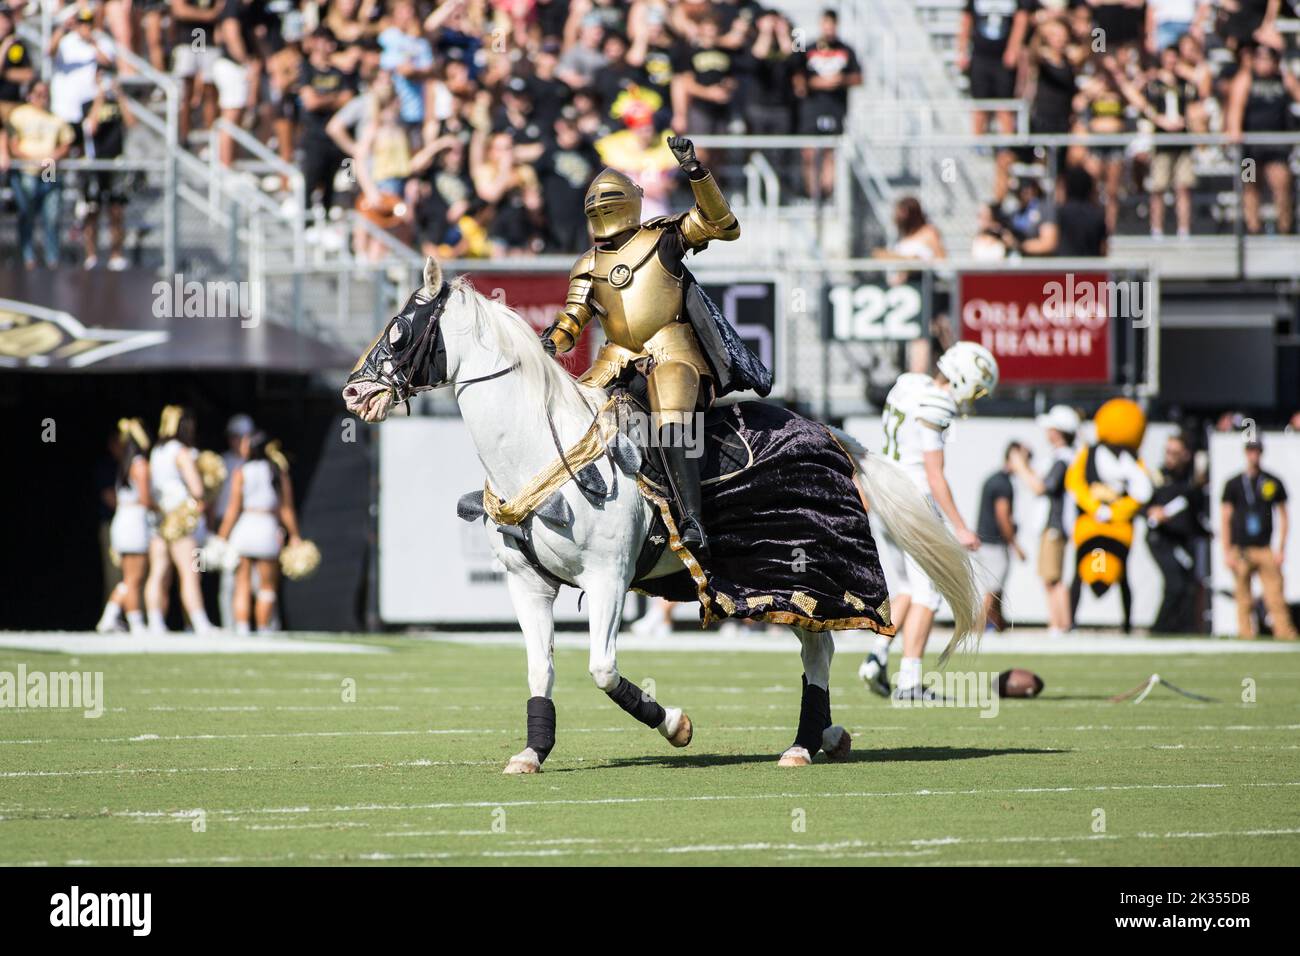 September 24, 2022: Pegasus takes the field before the NCAA football game between the Georgia Tech Yellow Jackets and the University of Central Florida Knights at FBC Mortgage Stadium Orlando, FL. Jonathan Huff/CSM. Stock Photo